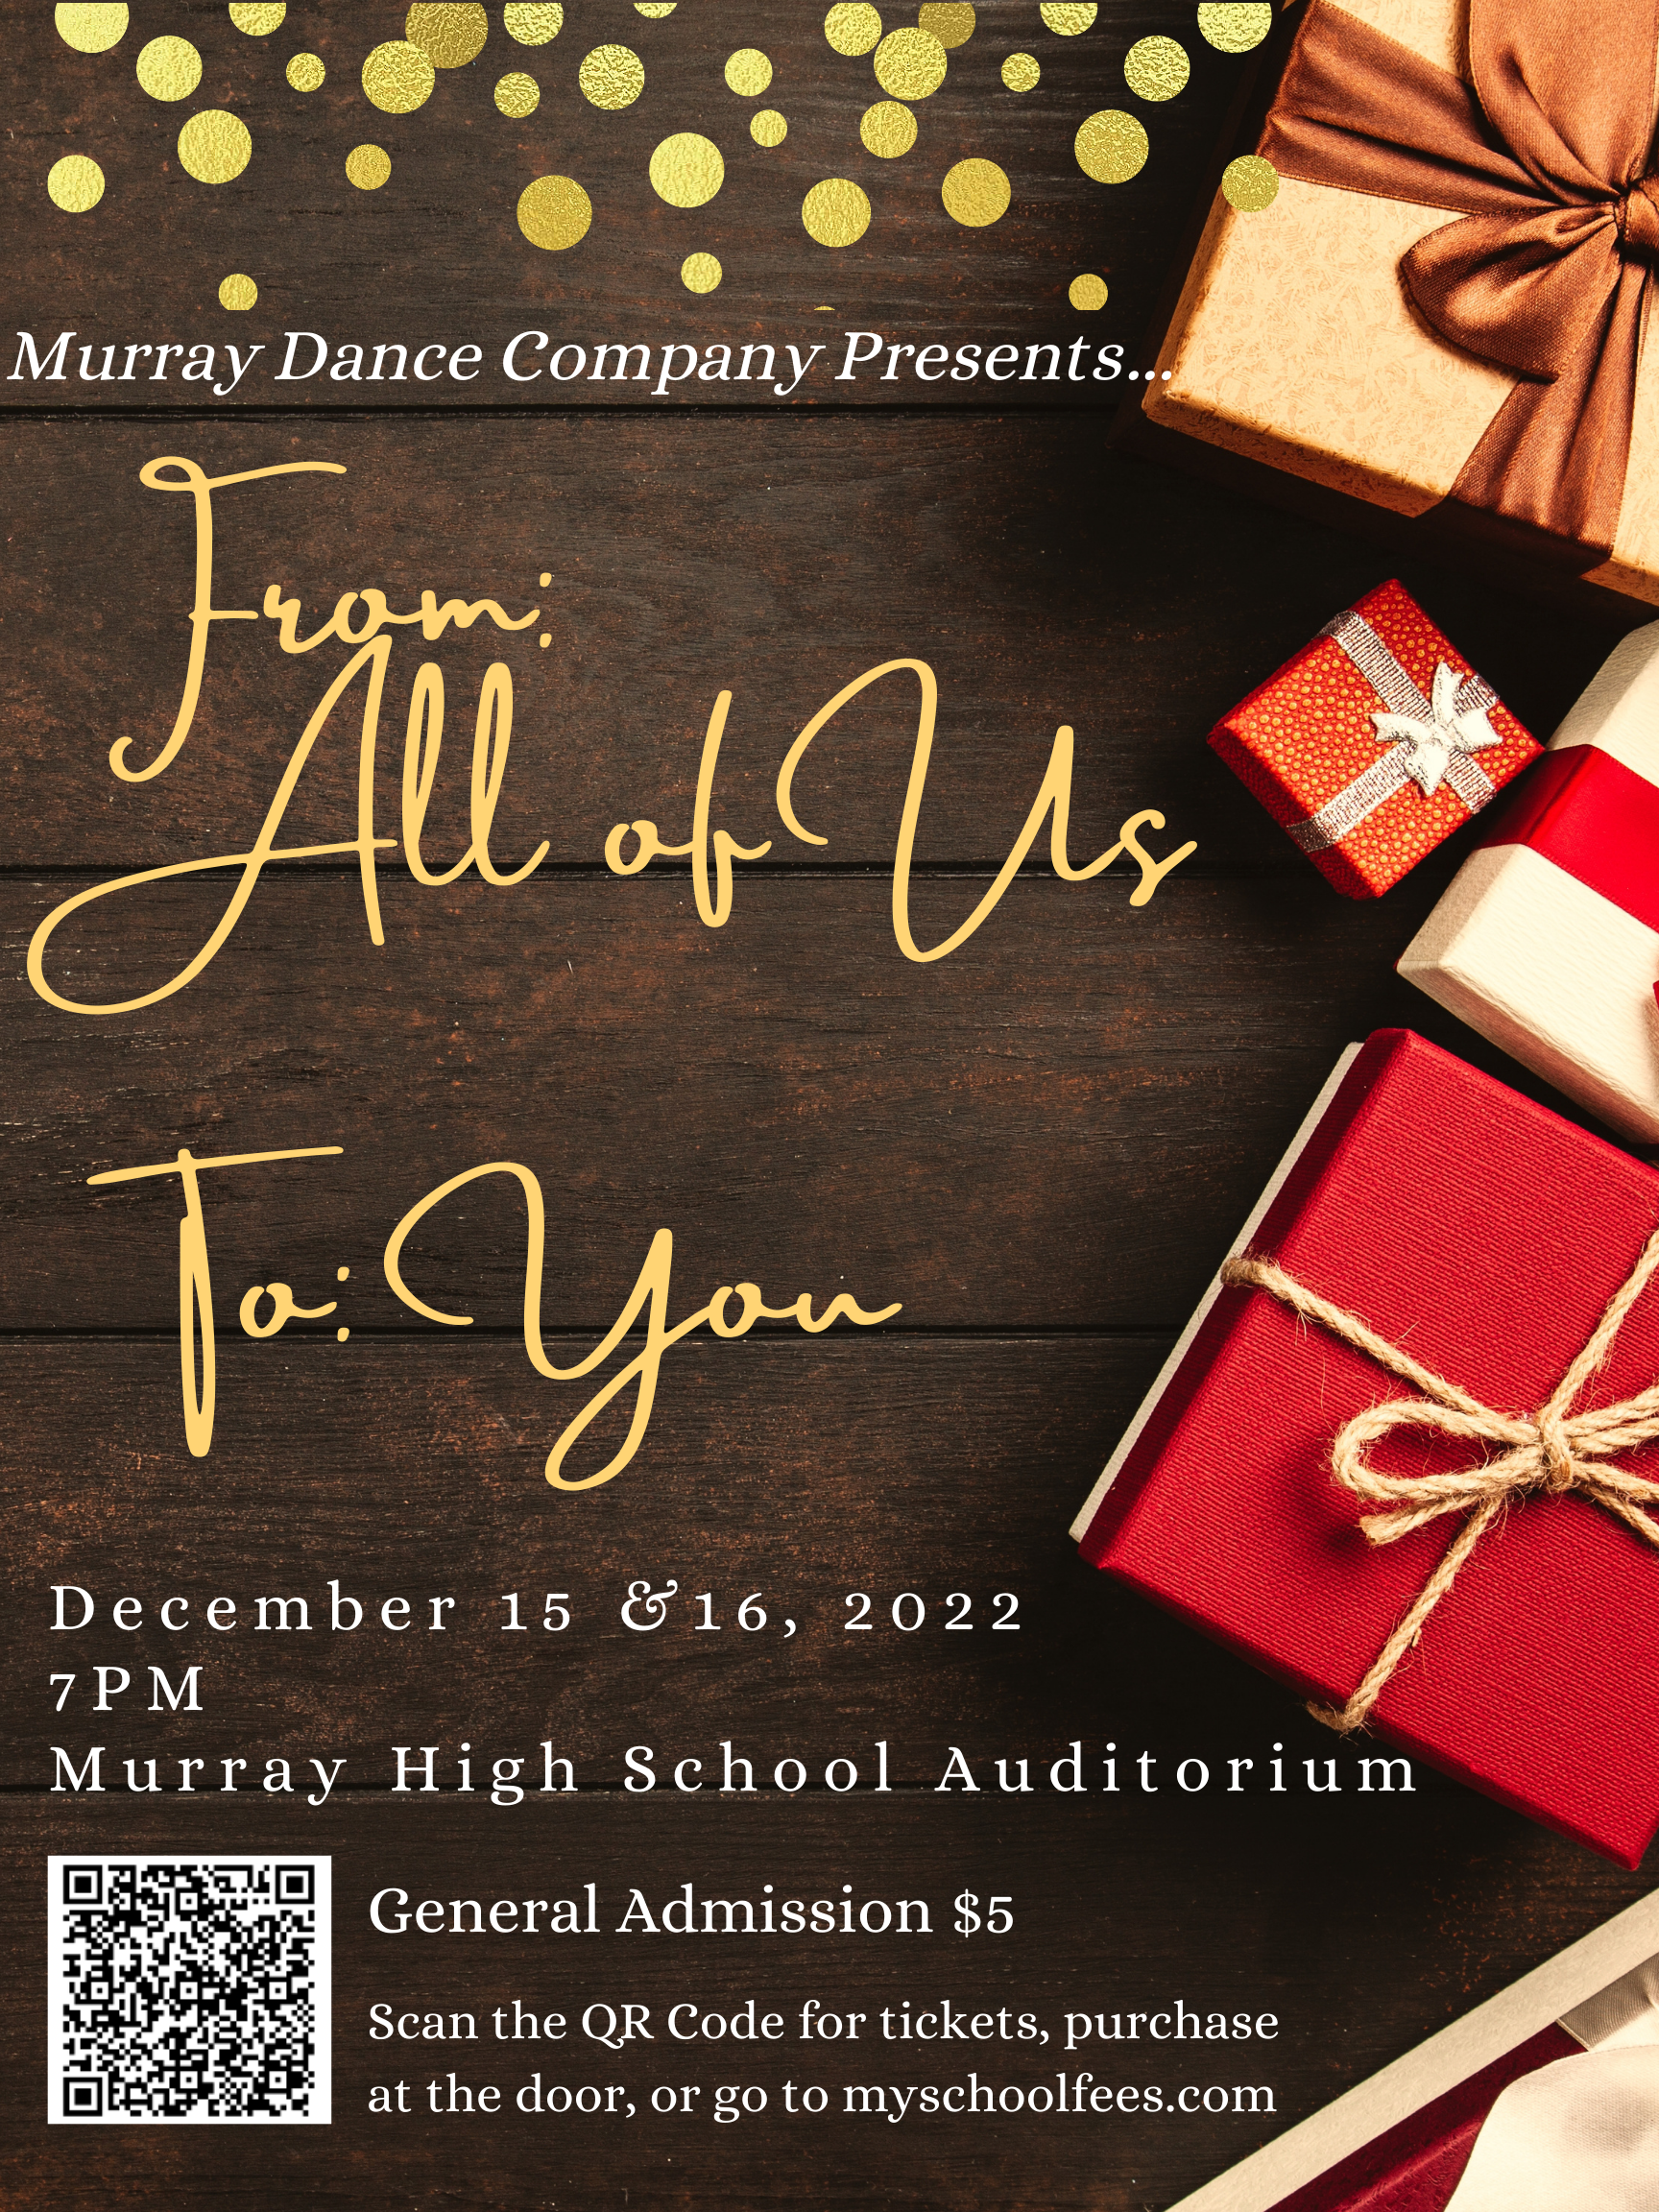 Murray Dance Company Presents From All of Us to You December 15 and 16, 2022 7pm Murray High School Auditorium General Admission $5. Scan the QR code for tickets, purchase at the door, or go to myschoolfees.com